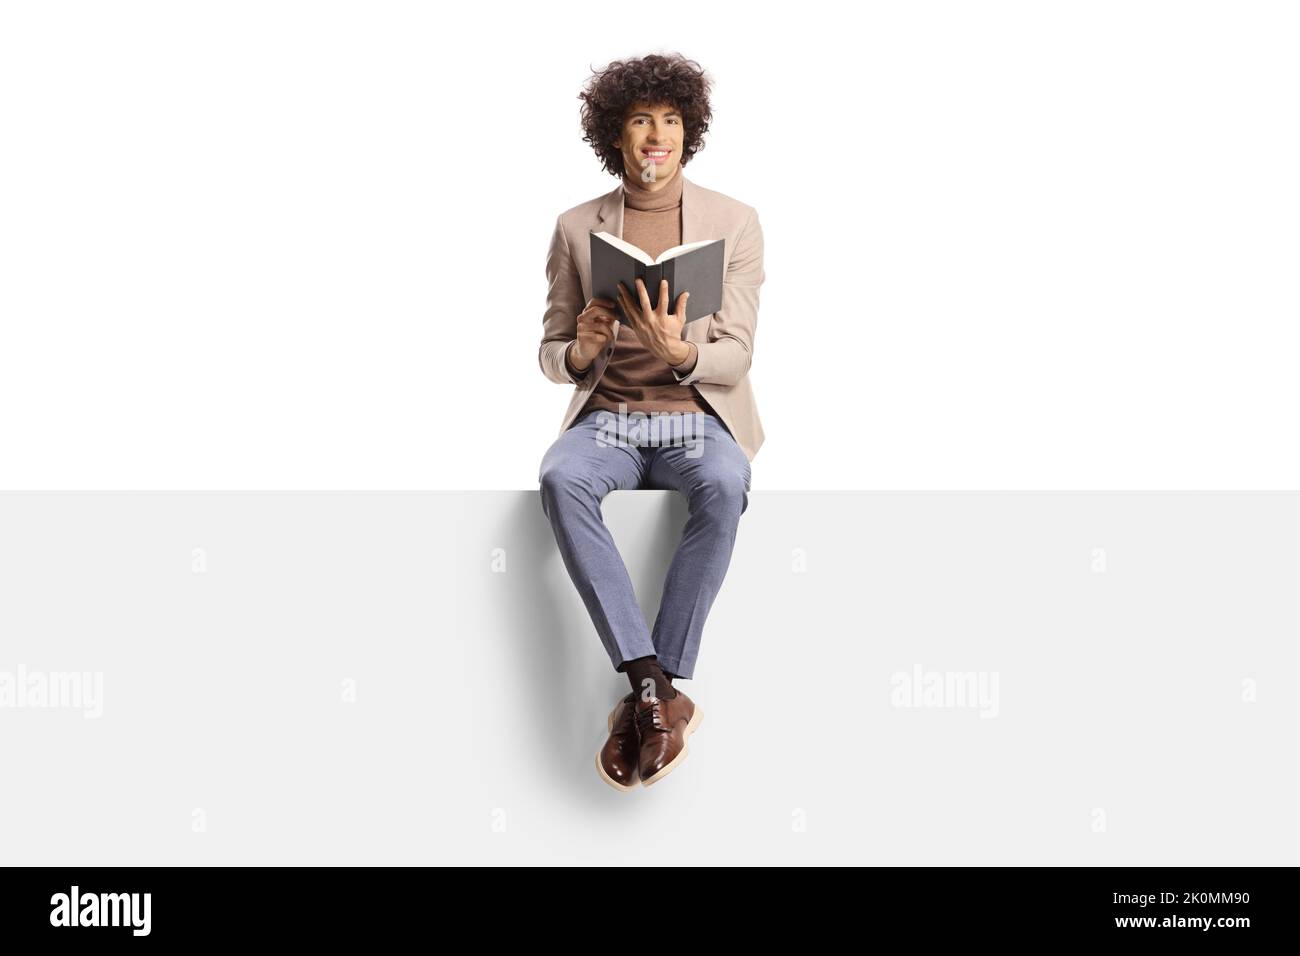 Elegant young man with curly hair sitting on a panel and holding a book isolated on white background Stock Photo